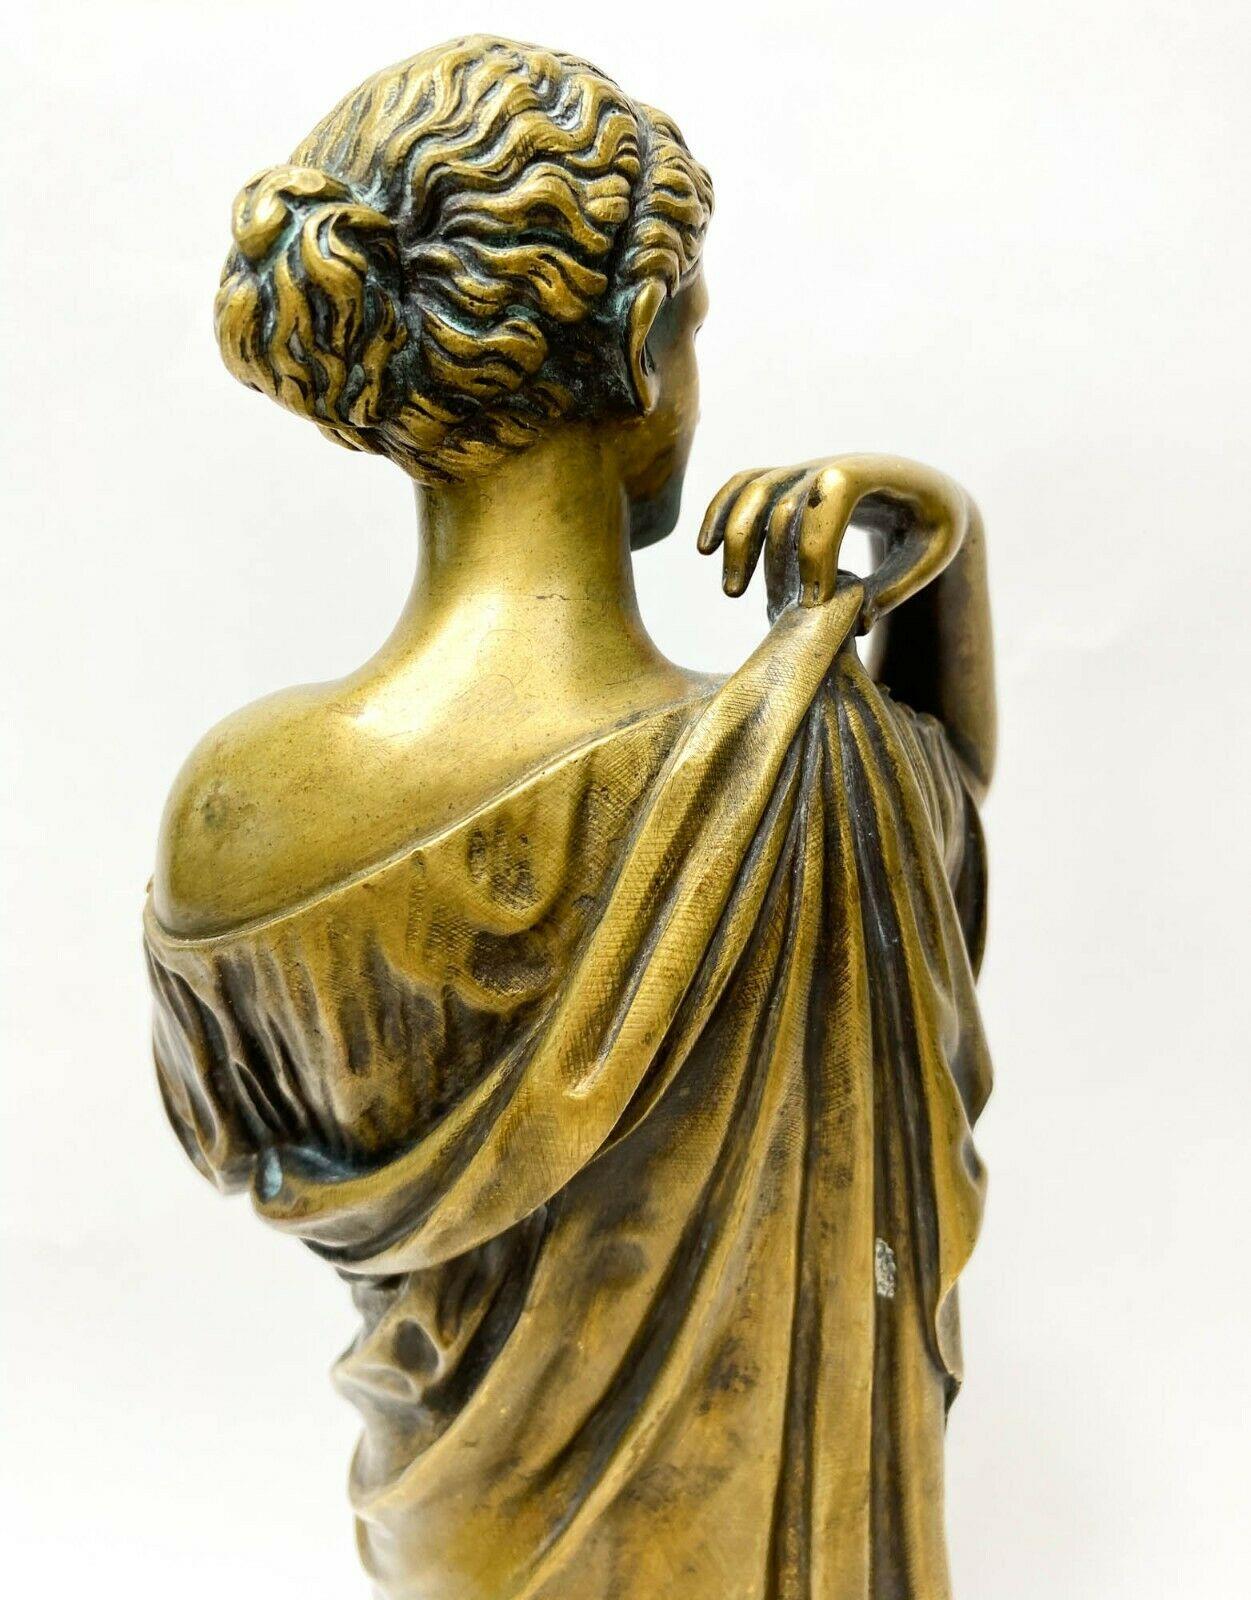 19th Century Gilt Bronze Sculpture Susse Freres Foundry Mark of a Classical Maiden, c1800 For Sale